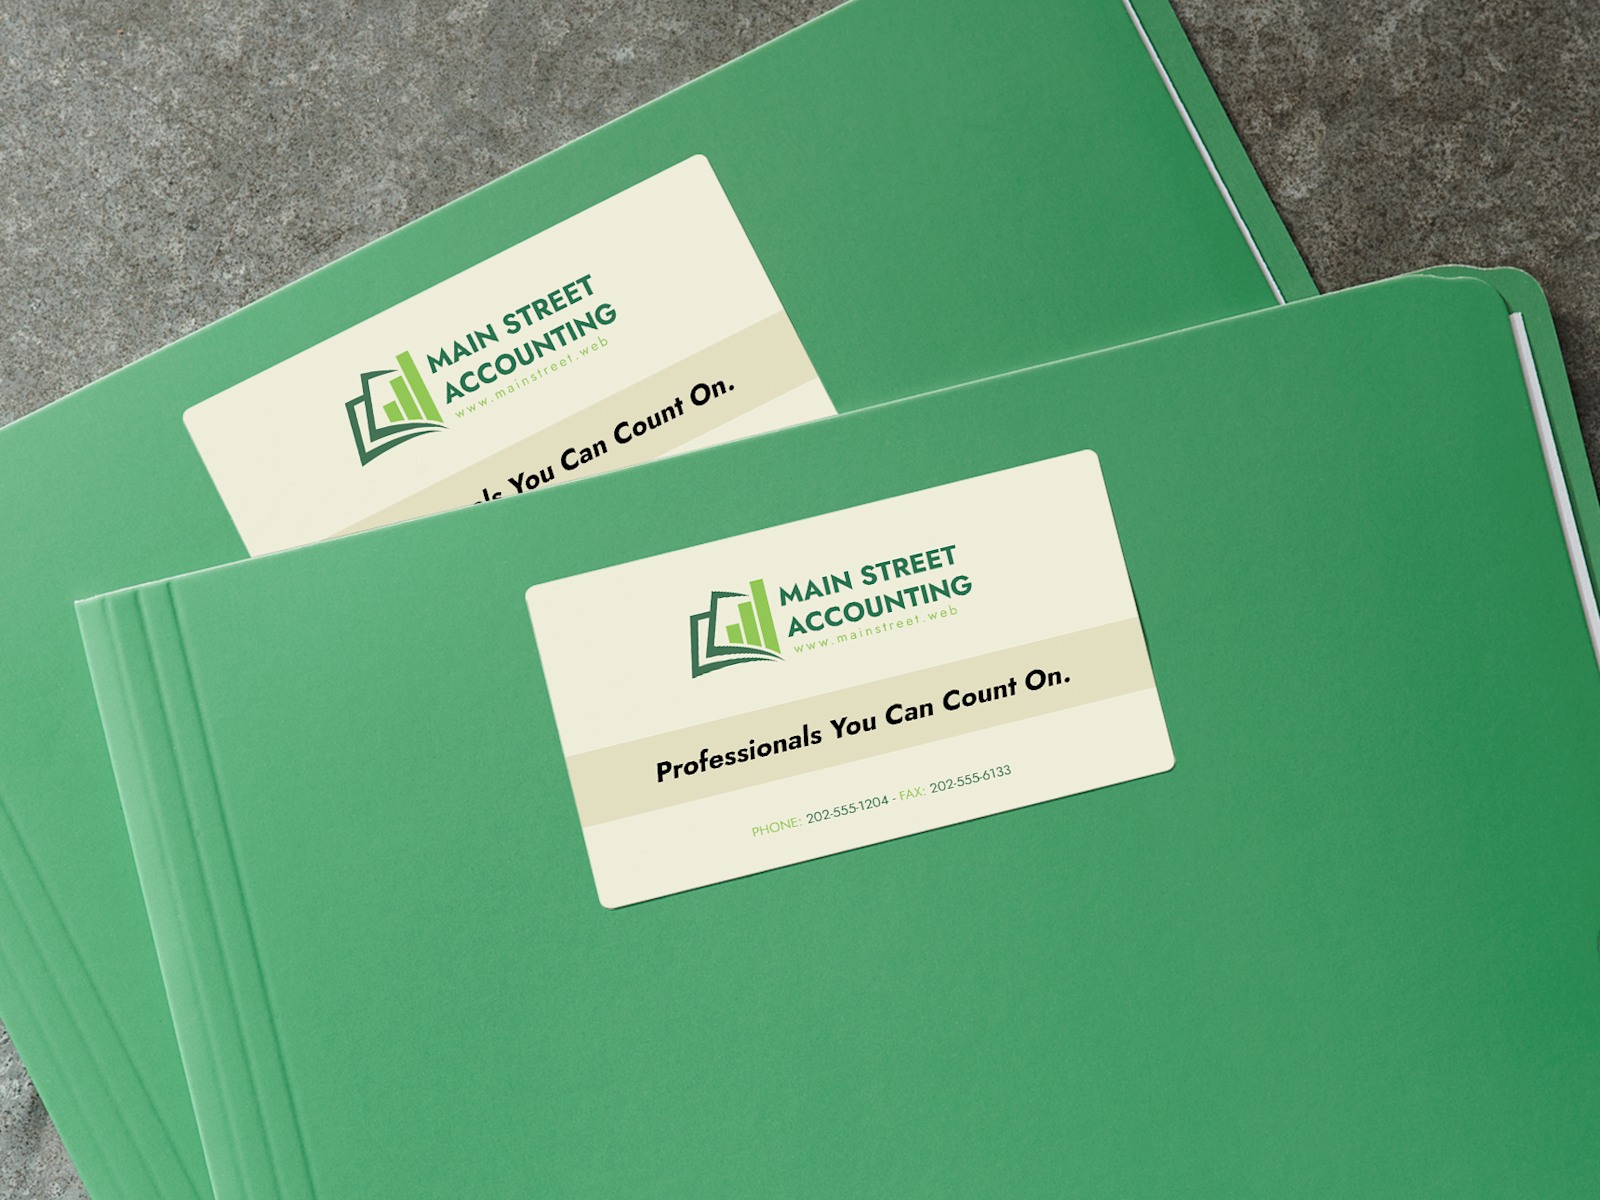 Larger version: A folder with a business card sticker on the front advertising an accounting business.